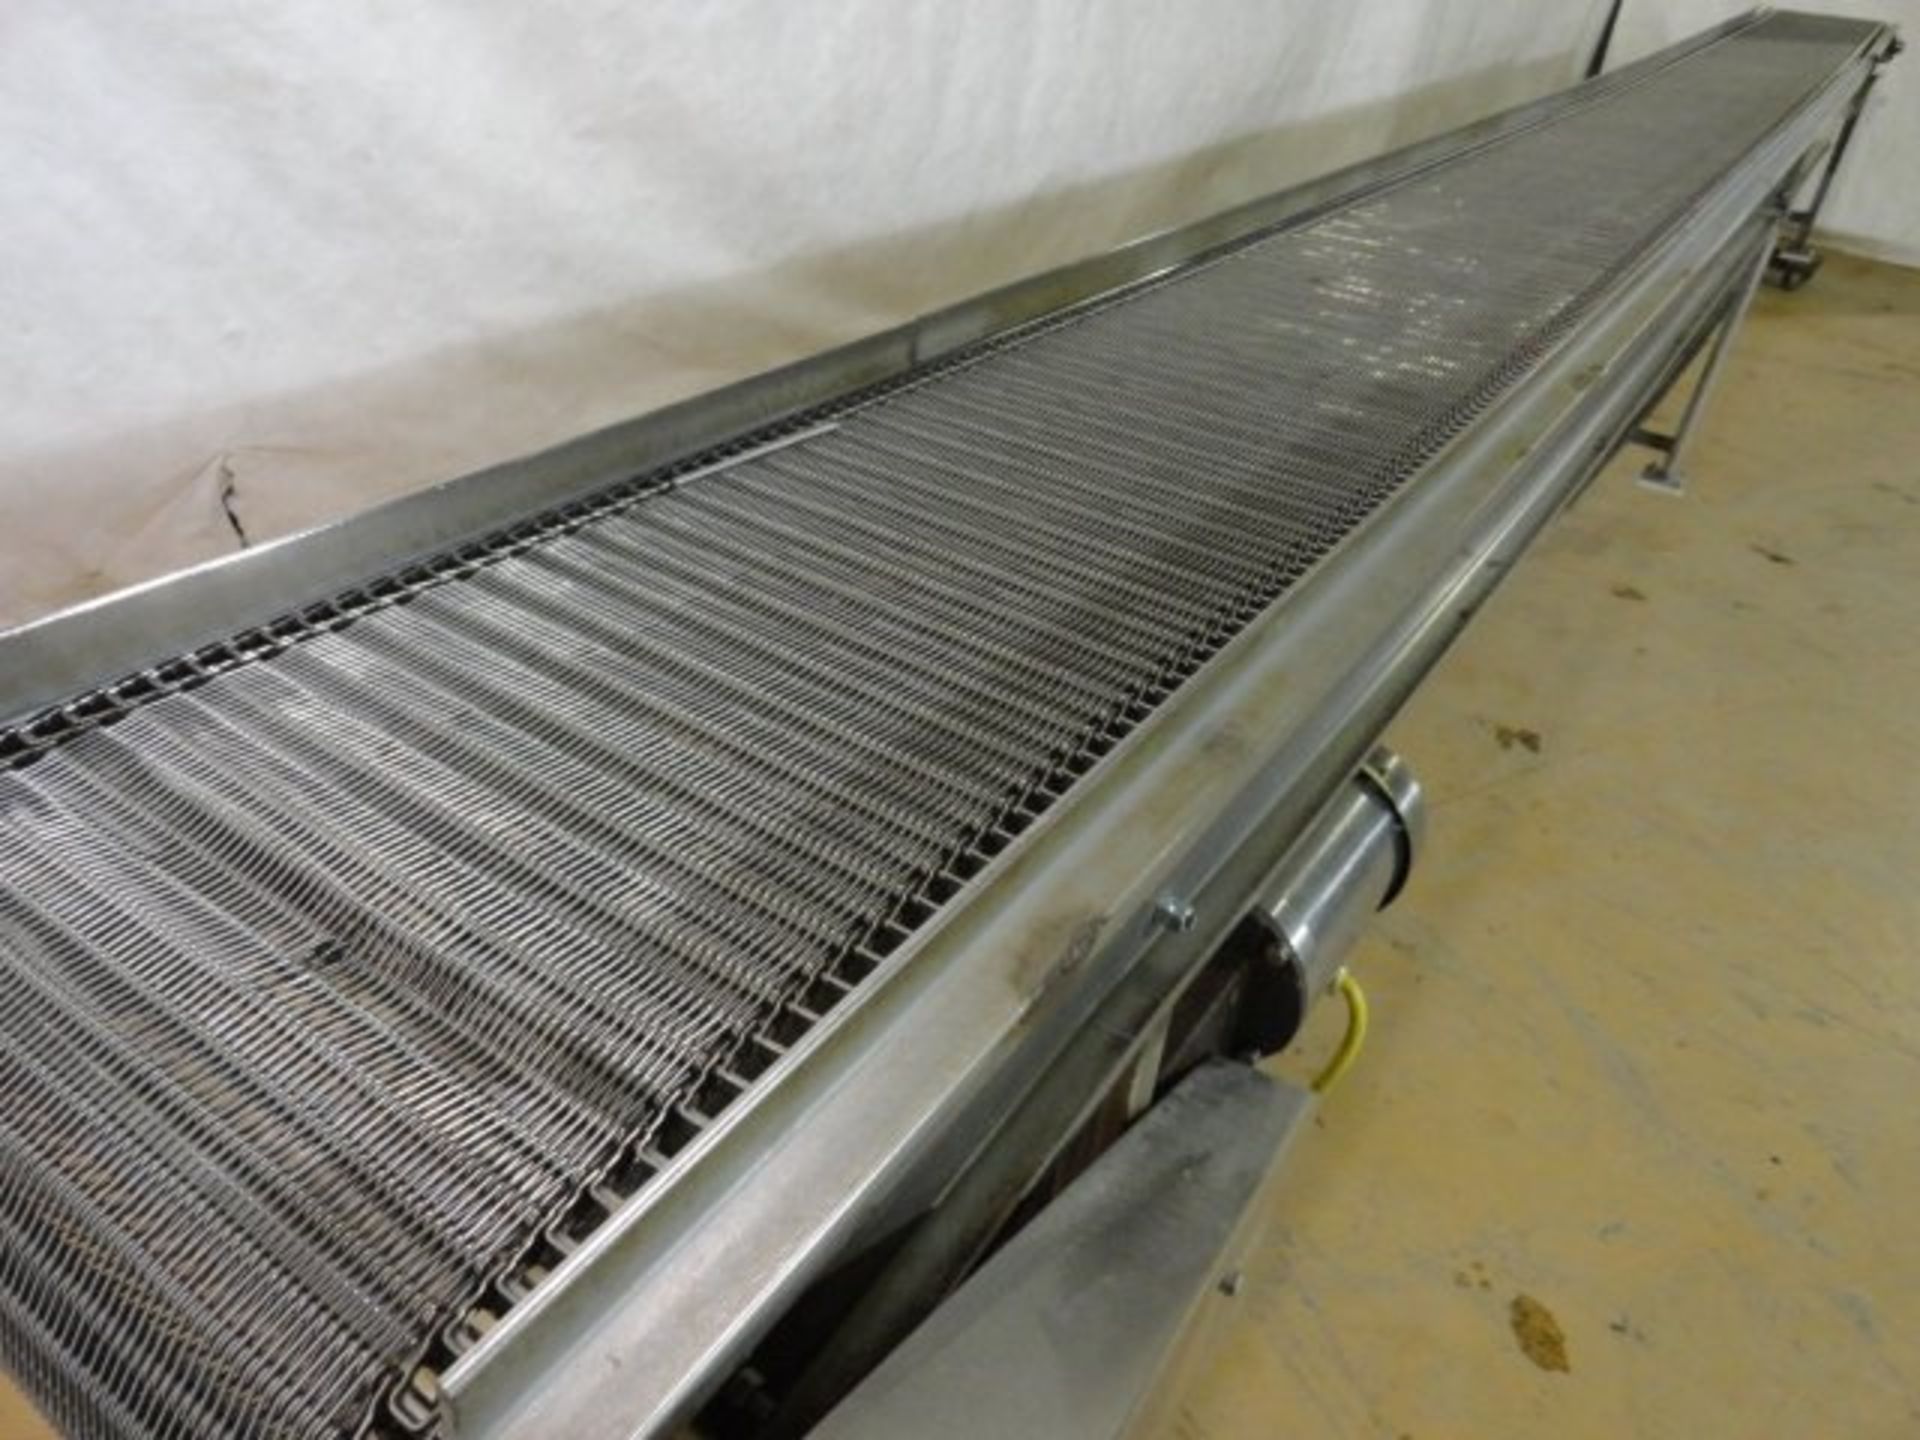 Stainless Steel Wire Mesh Belt Conveyor, 14"W x 23' L. - Image 3 of 5